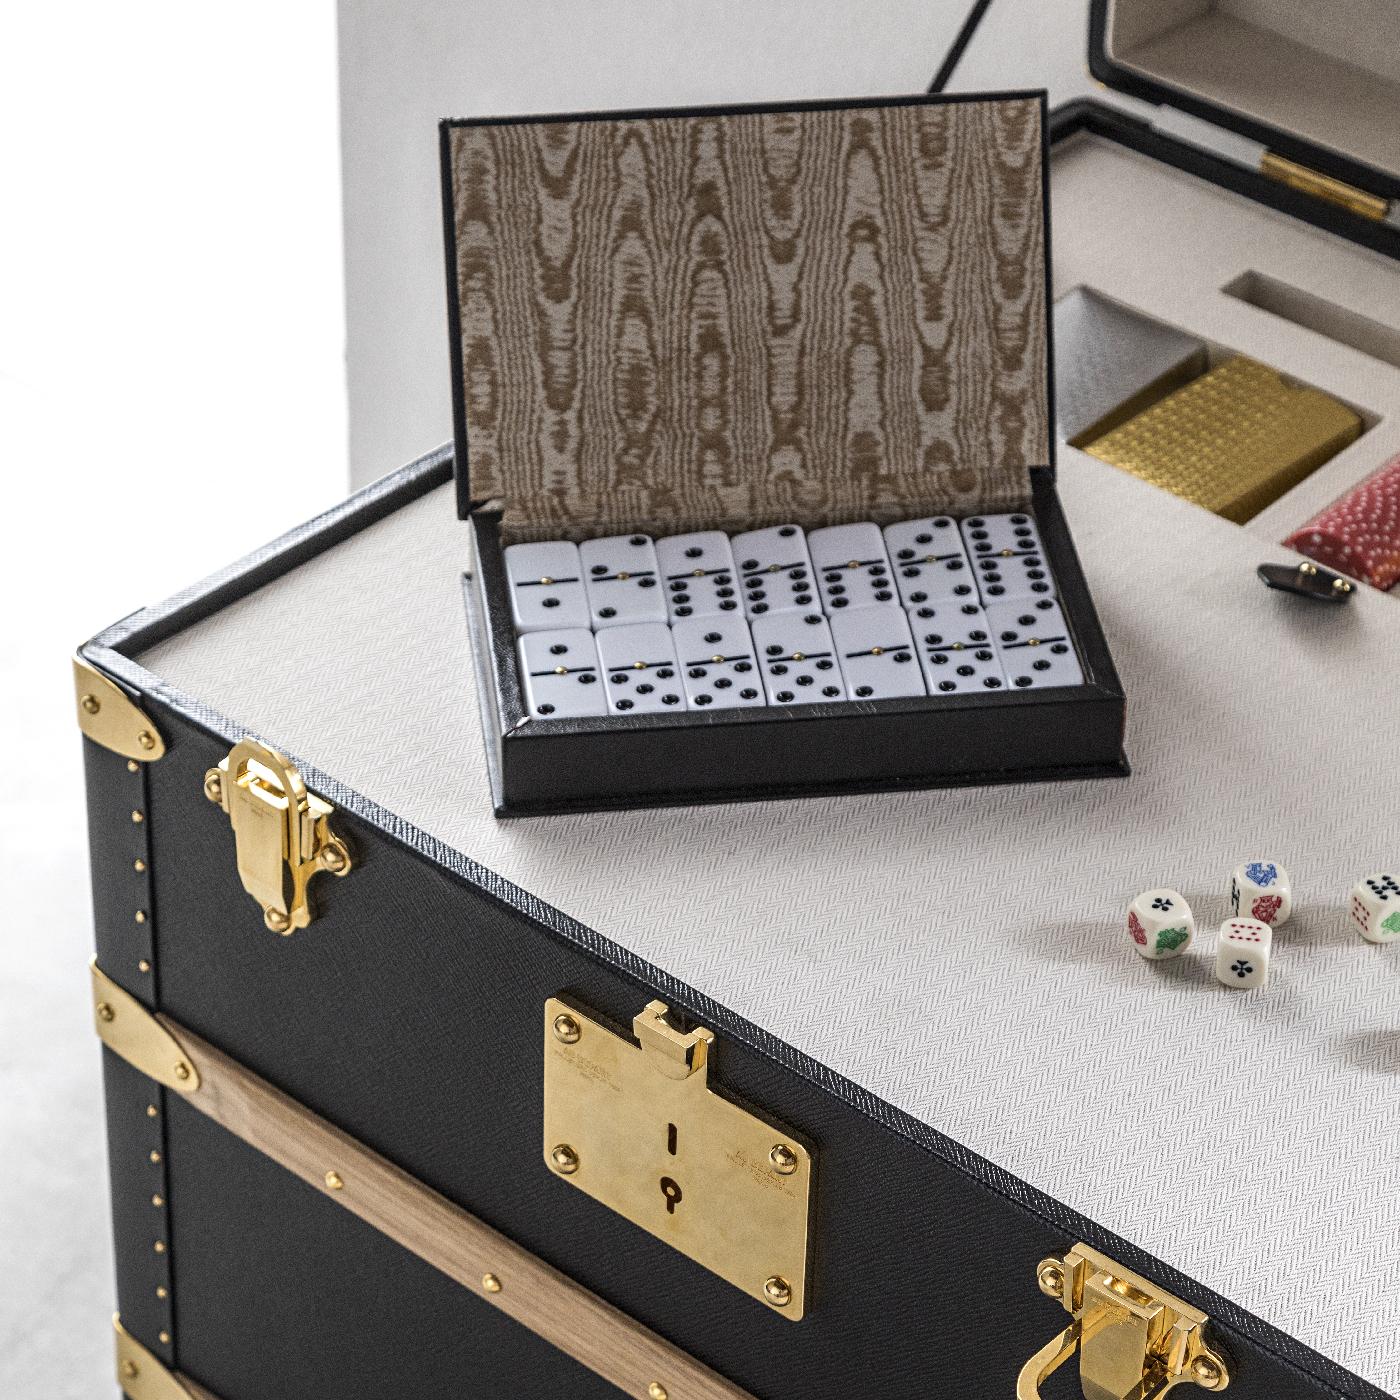 Part of the Music and Games collection, this elegant trunk combines a modern aesthetic with the old-fashioned allure of Classic board games, conveniently stored all in one place. The elegant and spacious piece includes cards and fiches games, a